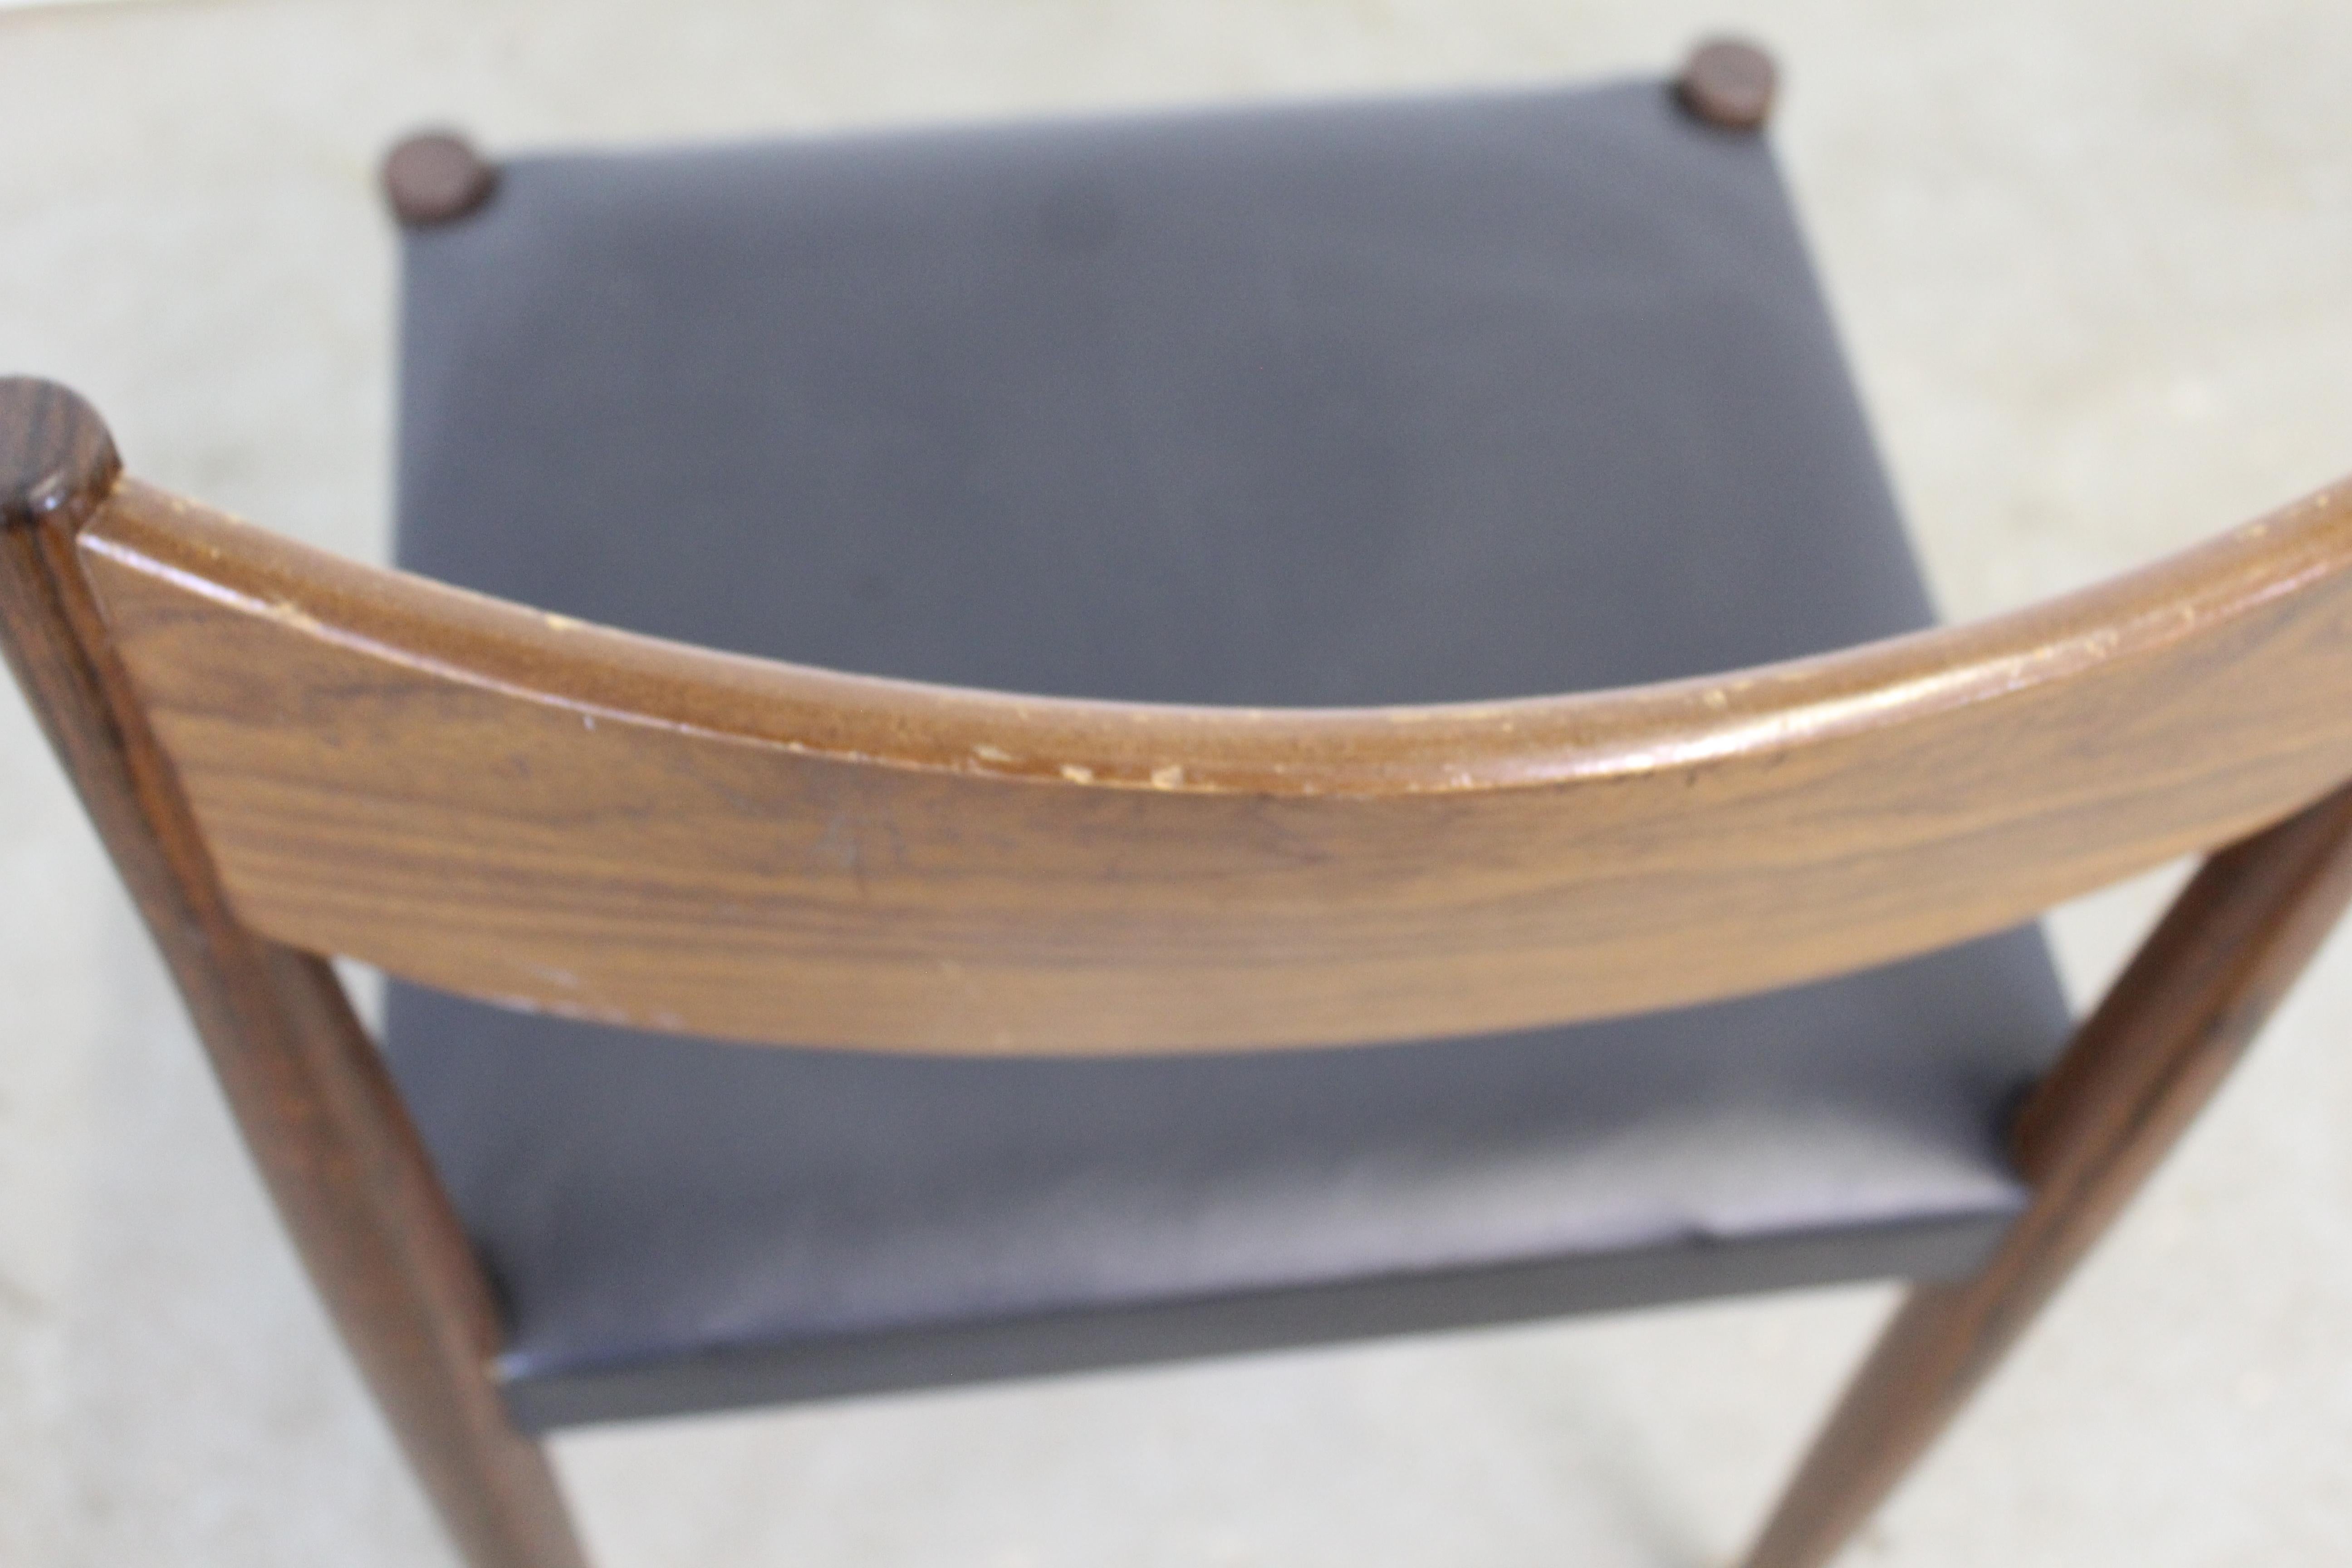 20th Century Danish Modern Poul Volther for Frem Røjle Teak Dining Chair